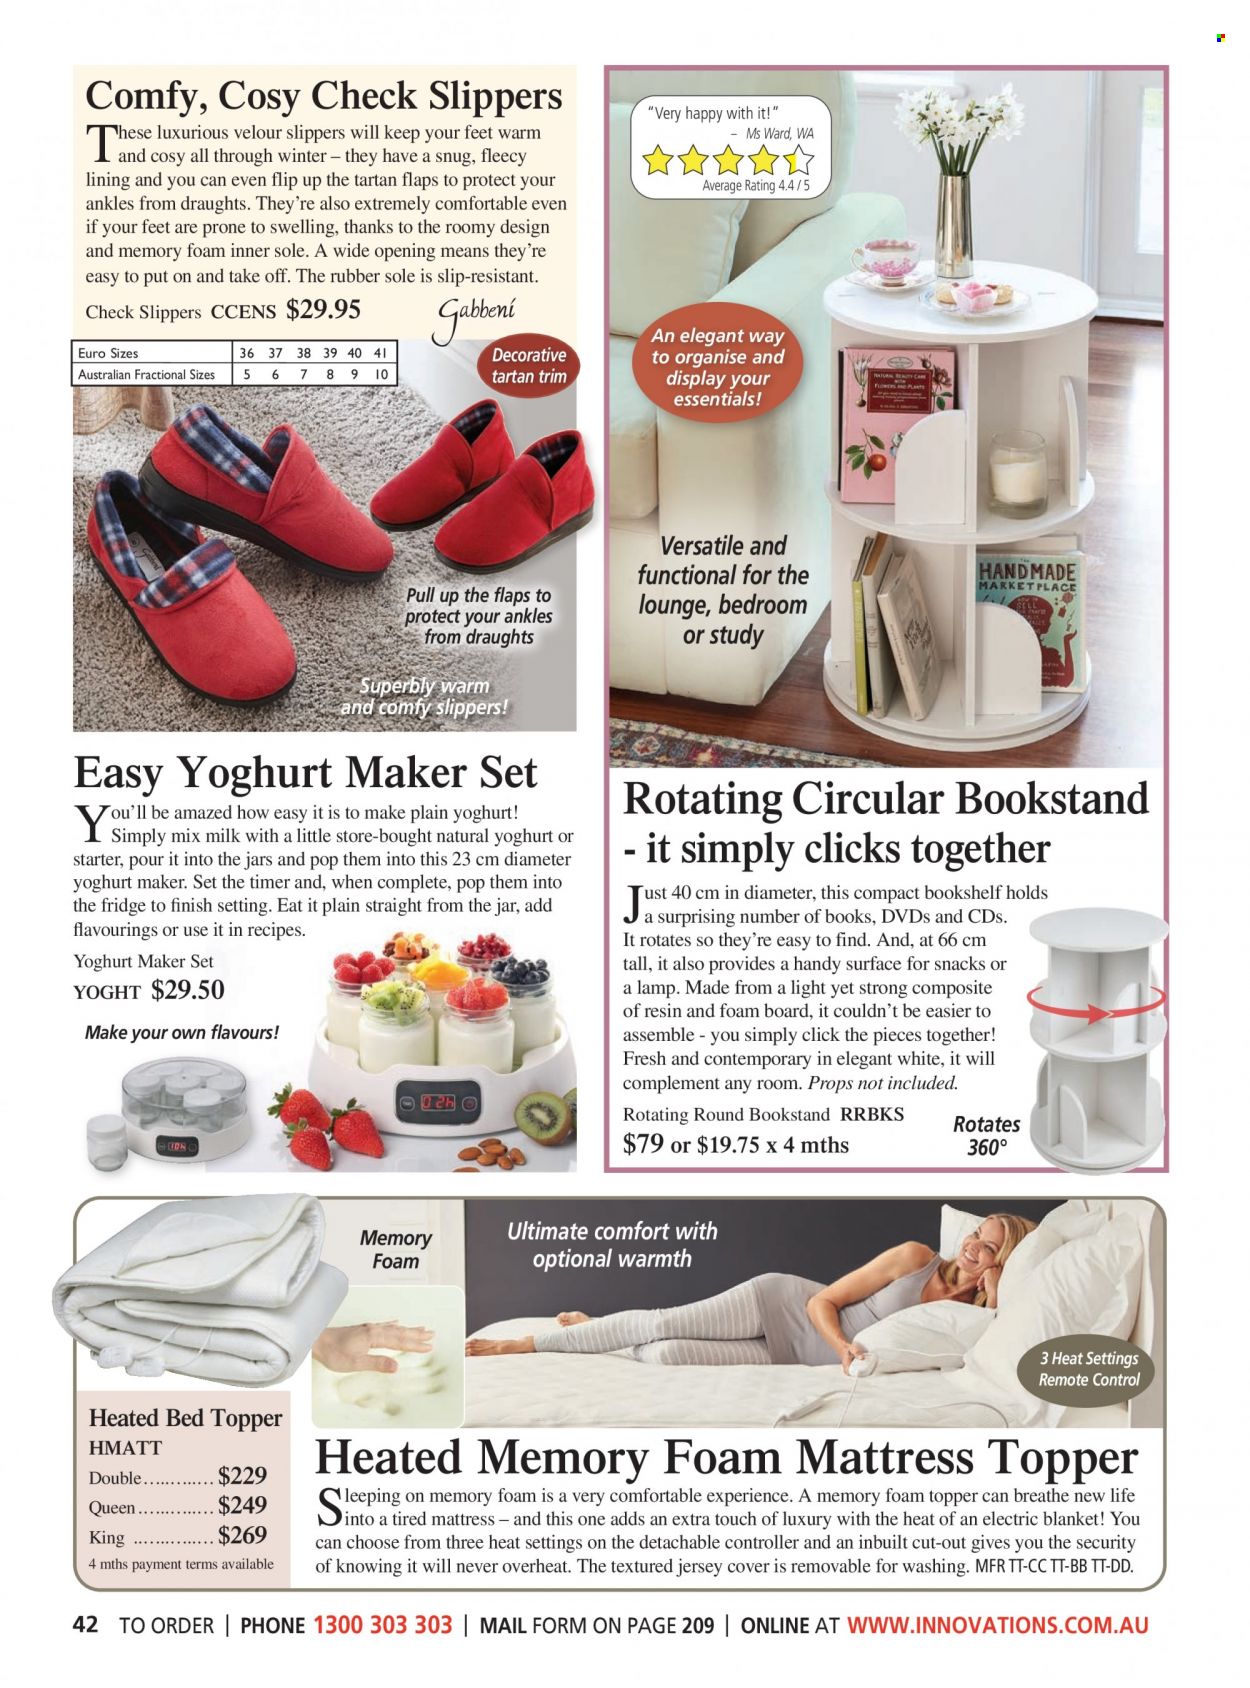 thumbnail - Innovations Catalogue - Sales products - slippers, jar, book, blanket, topper, mattress protector, remote control, electric blanket, jersey, Snug, lamp. Page 42.